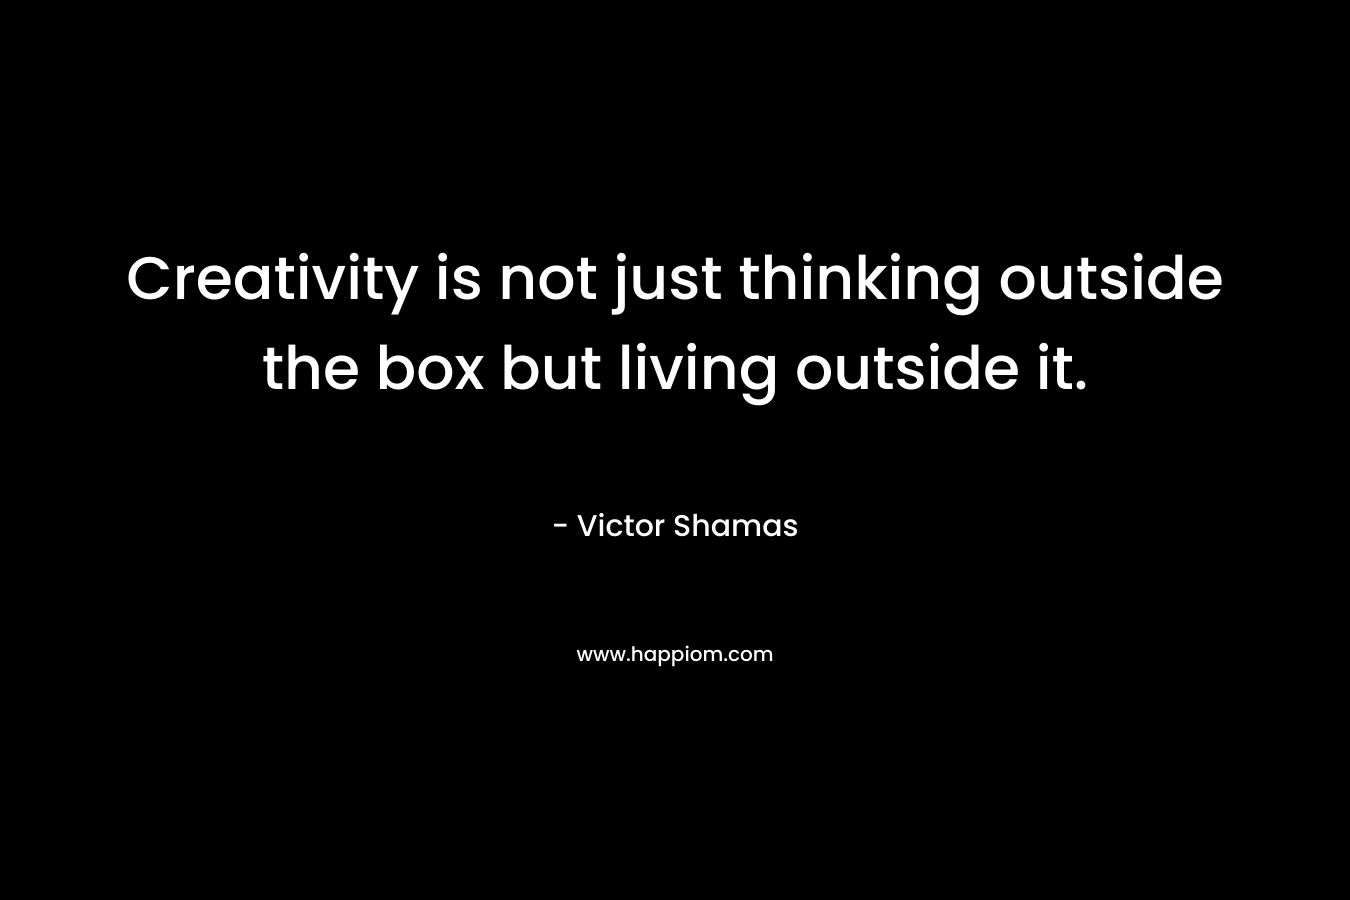 Creativity is not just thinking outside the box but living outside it.